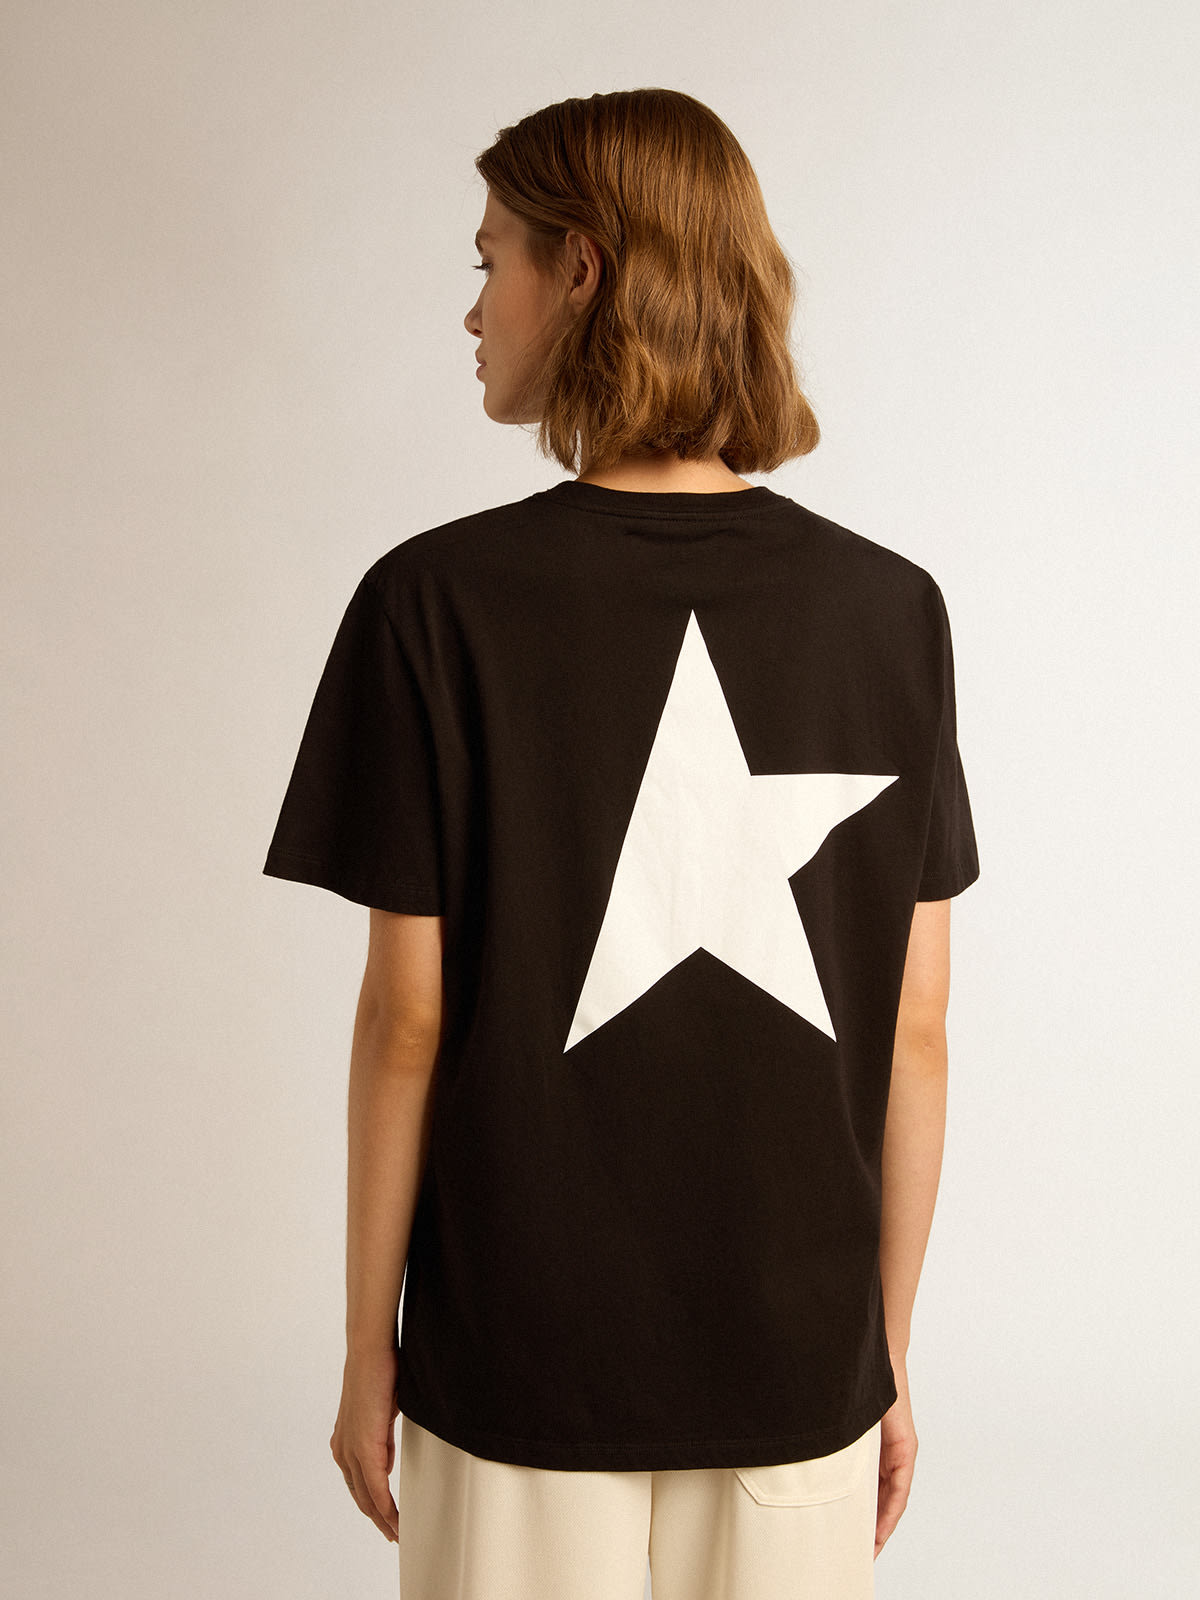 Golden Goose - Black Star Collection T-shirt with contrasting white logo and star in 